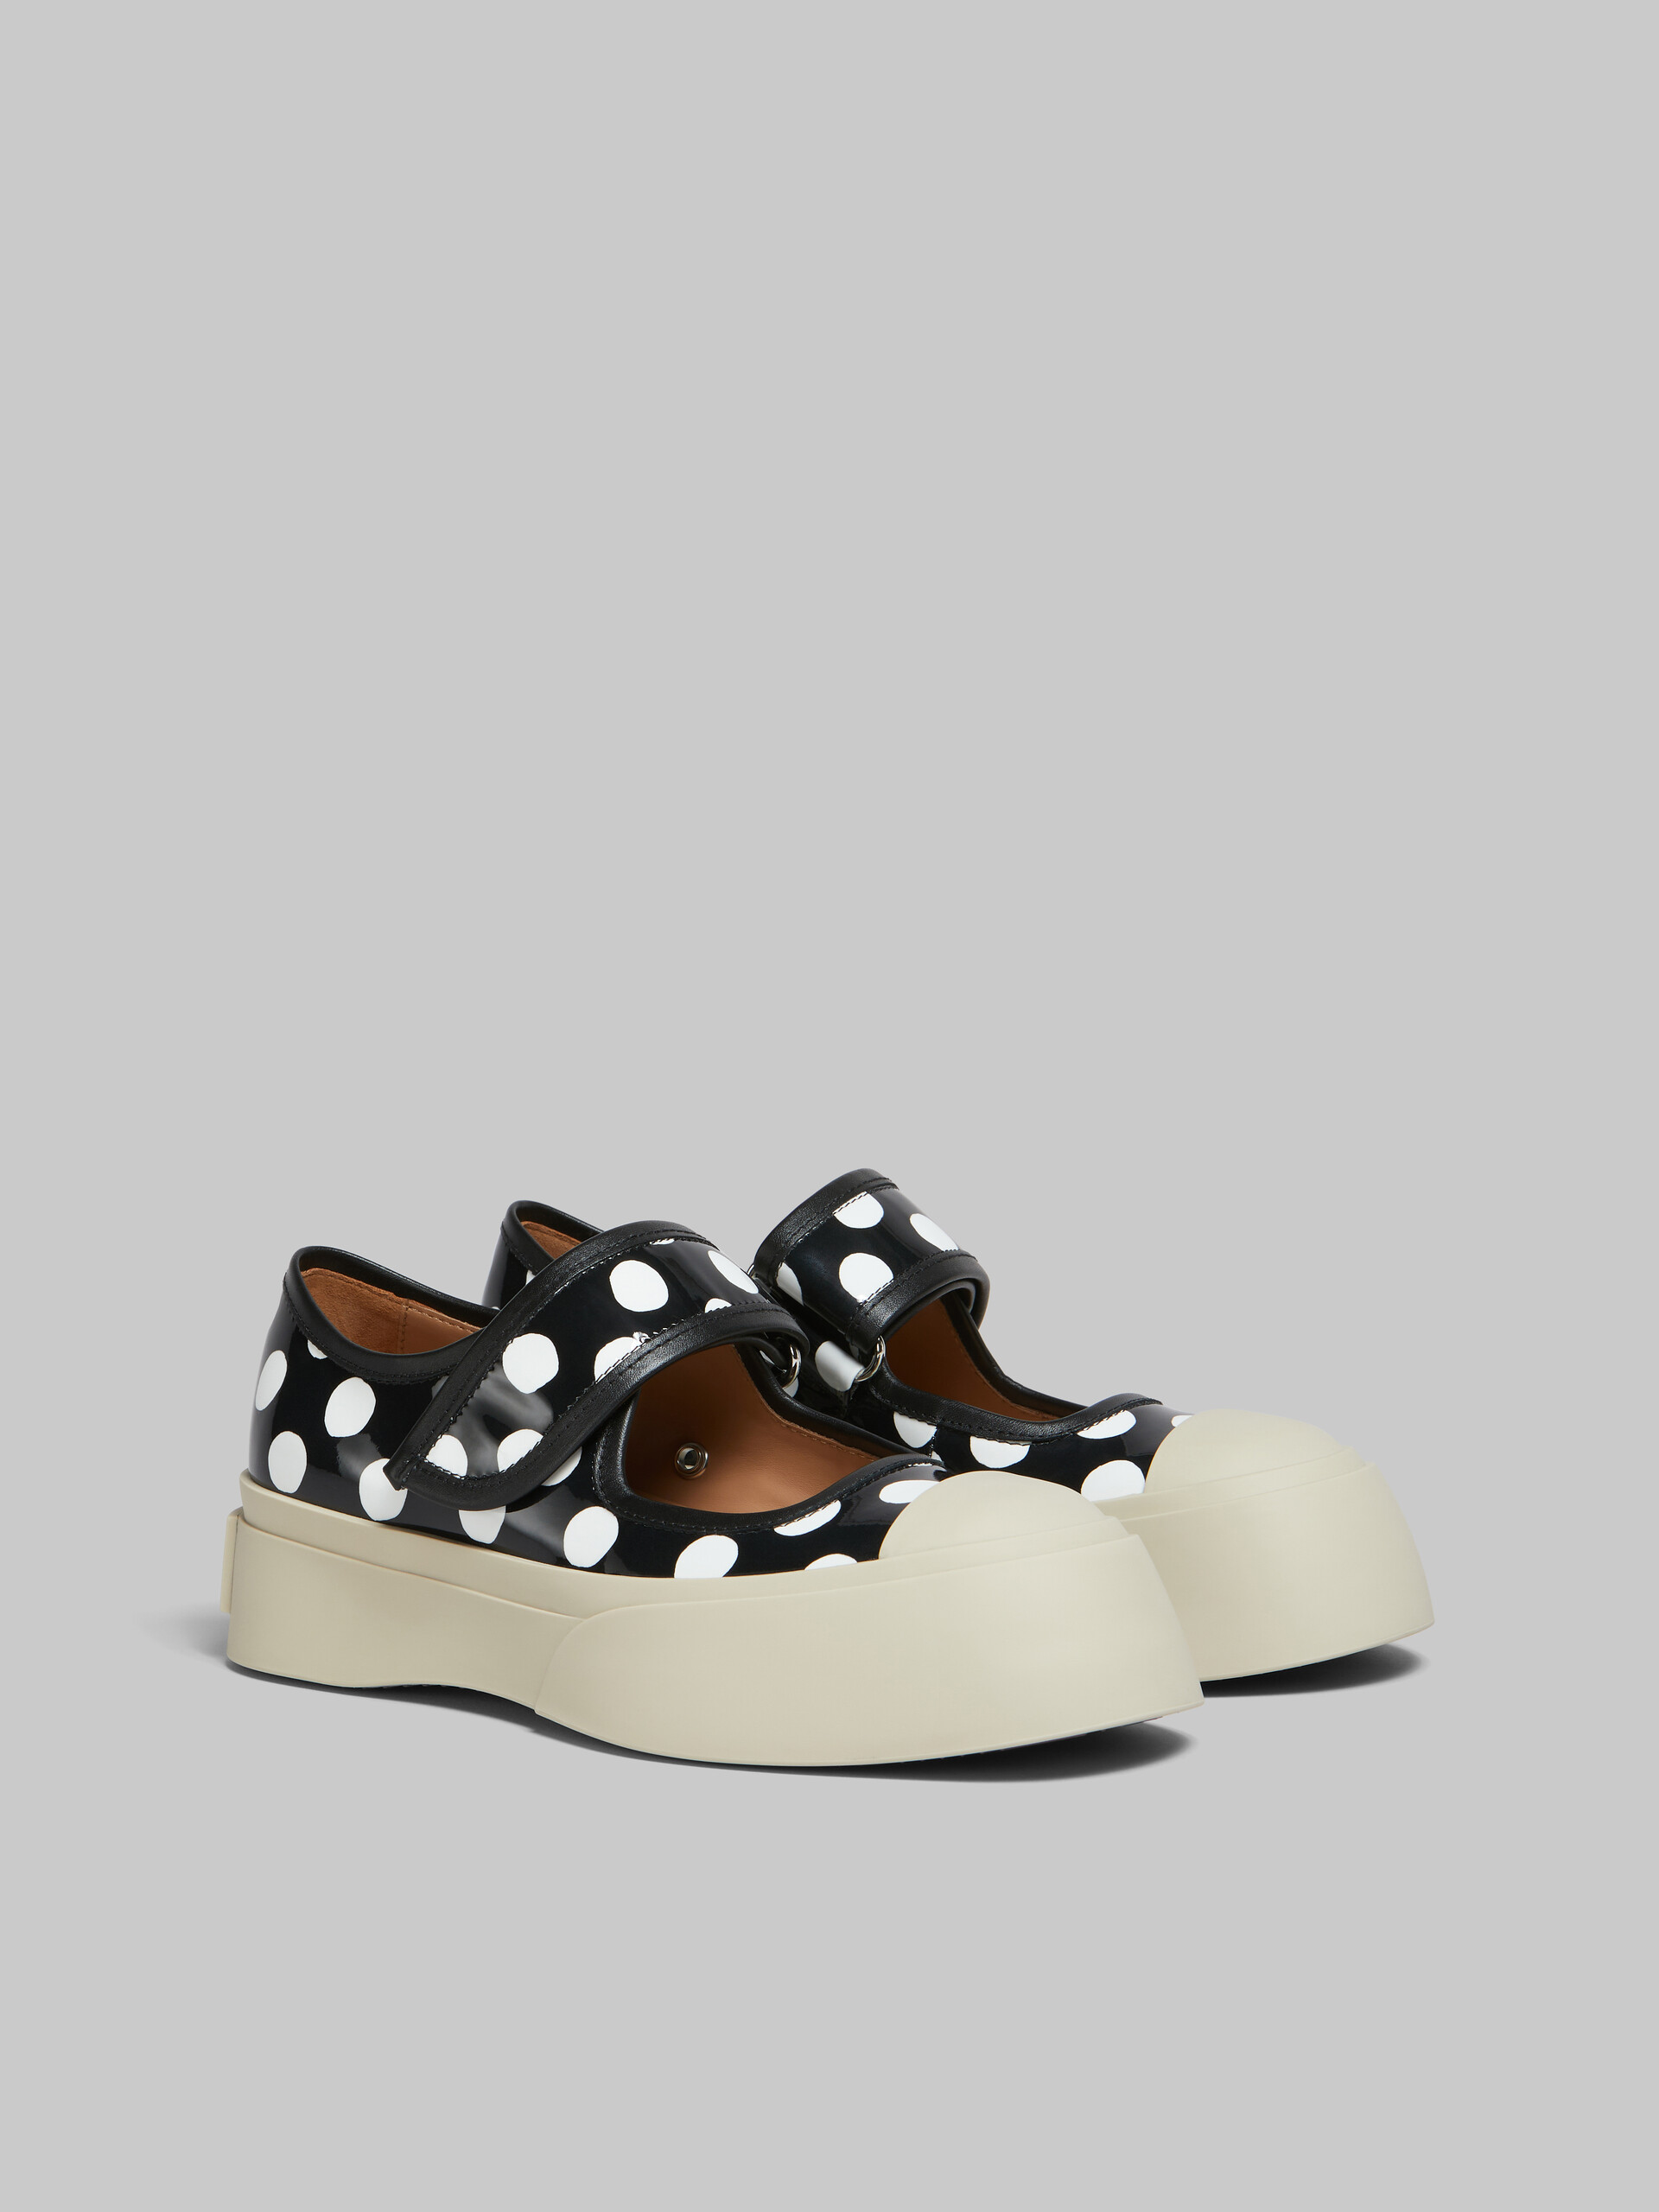 Black and white polka-dot patent leather Pablo Mary Jane sneaker - Sneakers - Image 2